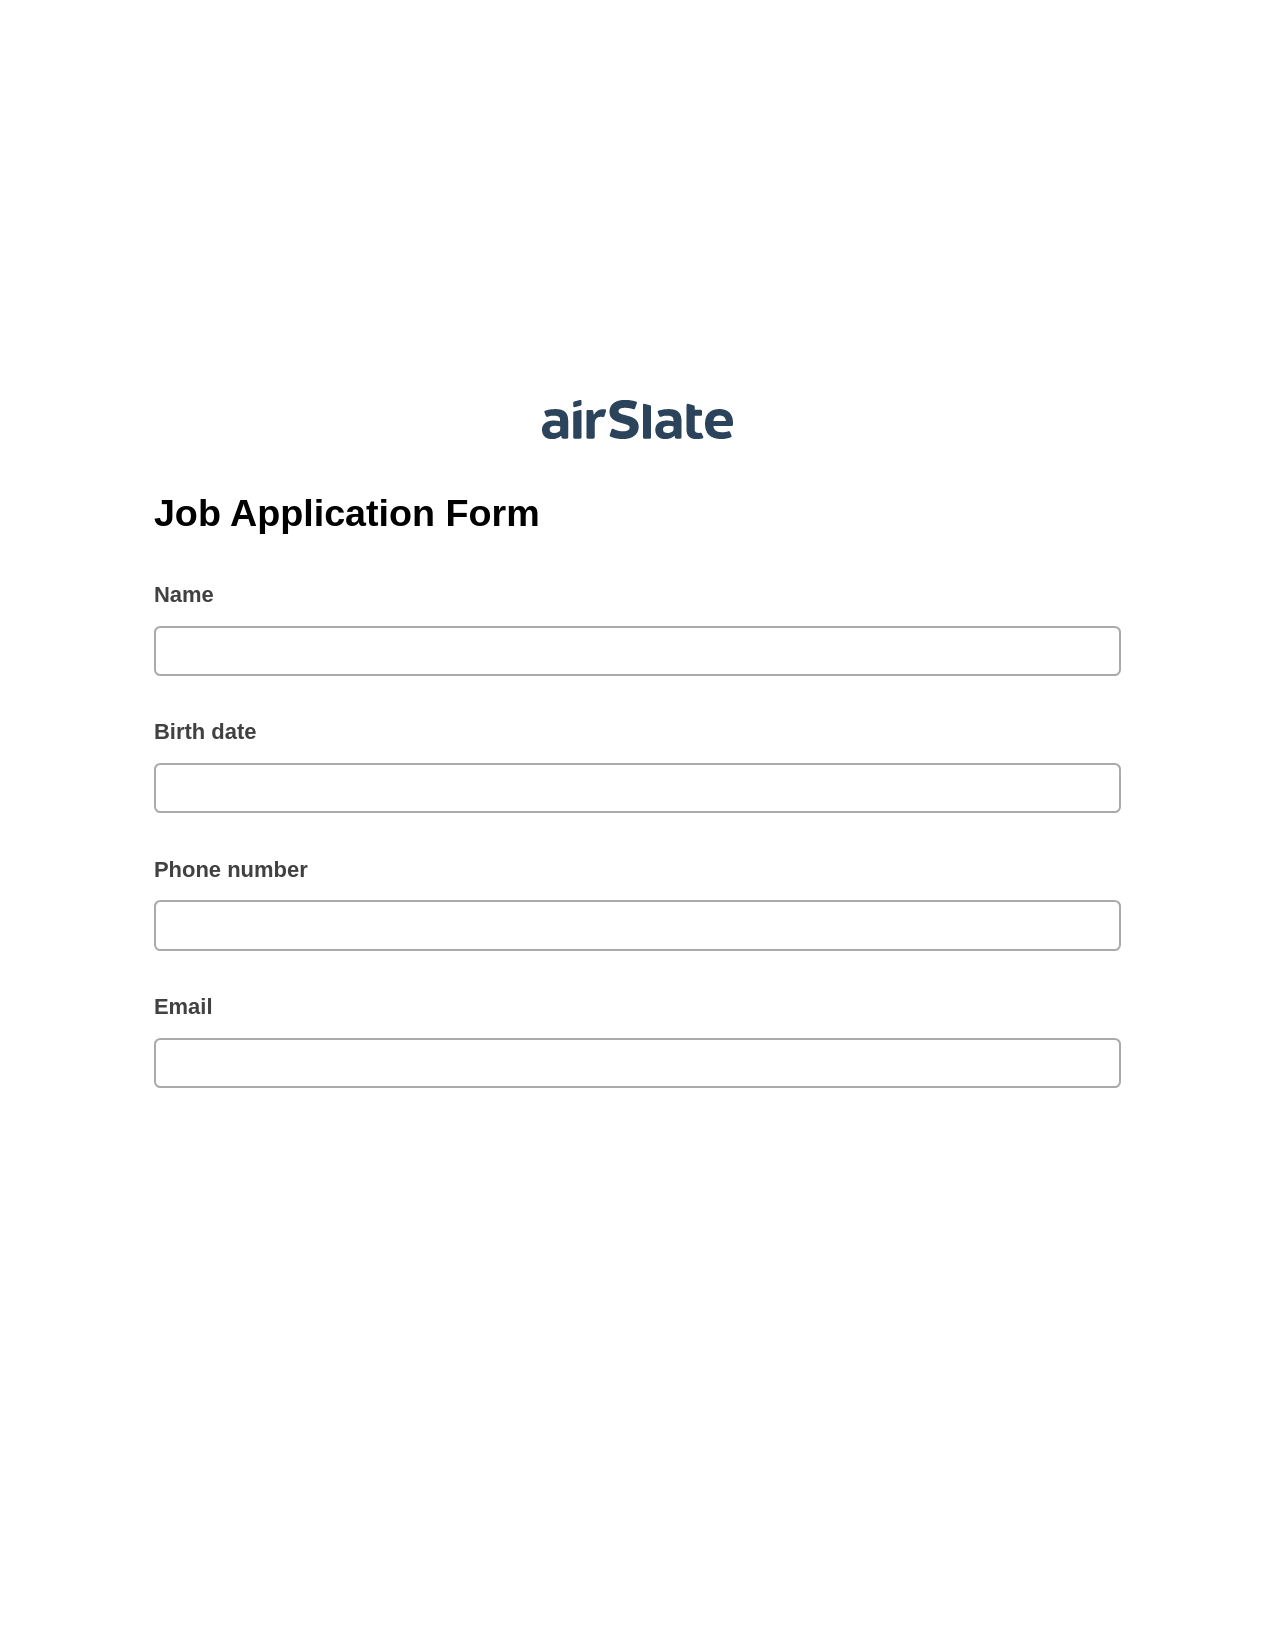 Job Application Form Pre-fill Dropdown from Airtable, Create slate bot, Slack Two-Way Binding Bot